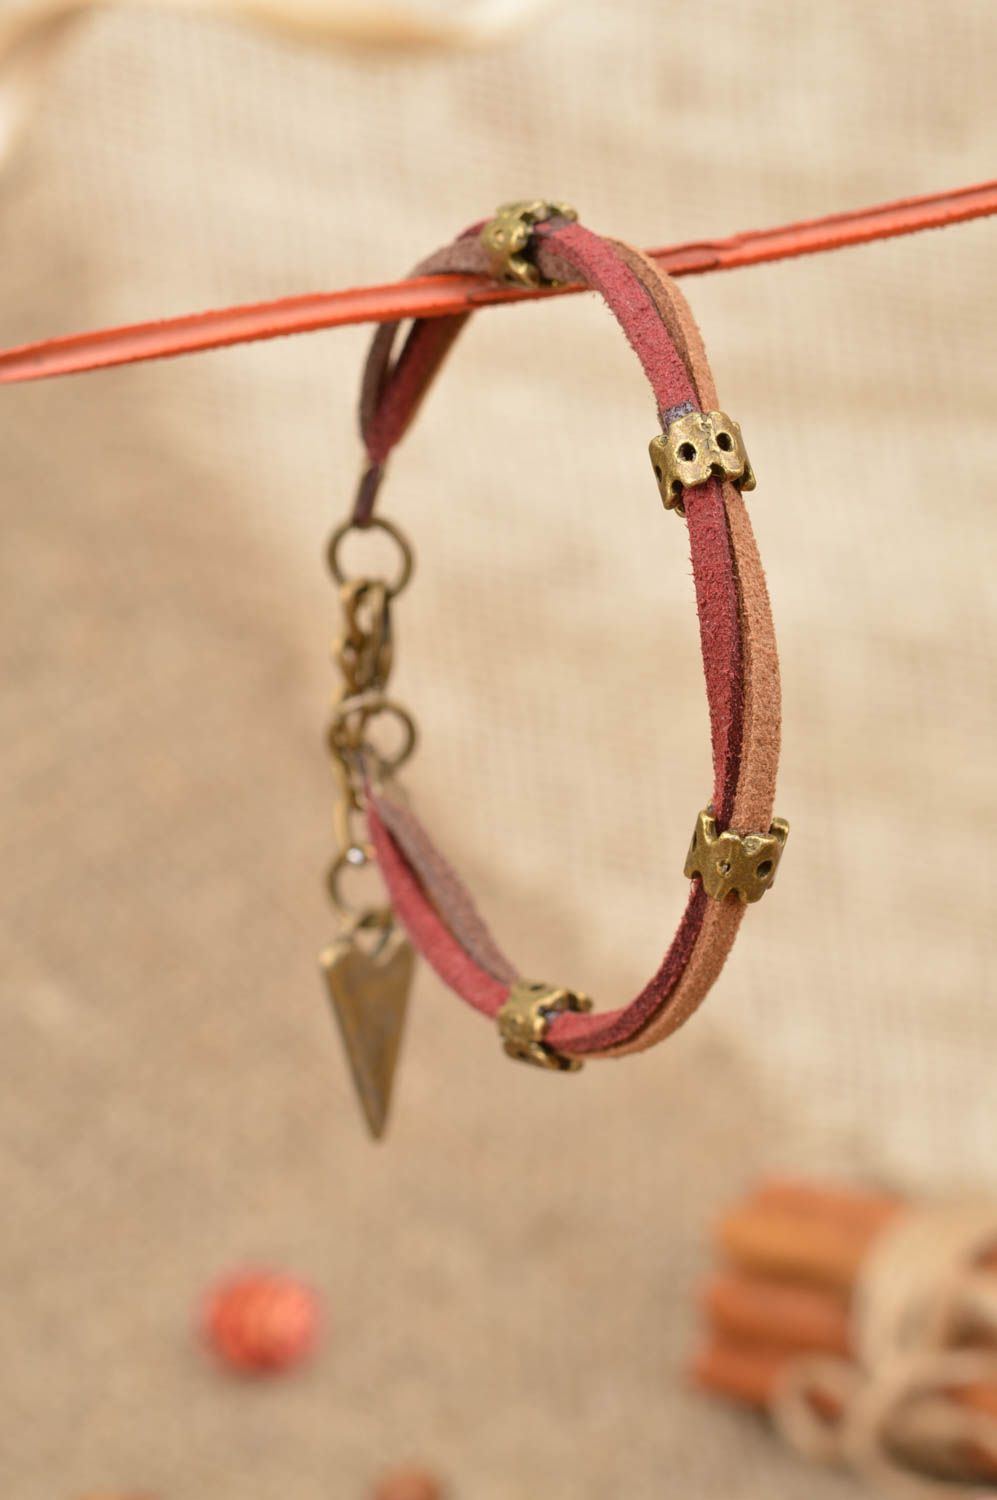 Handmade designer wrist suede cord women's bracelet with metal inserts and charm photo 1